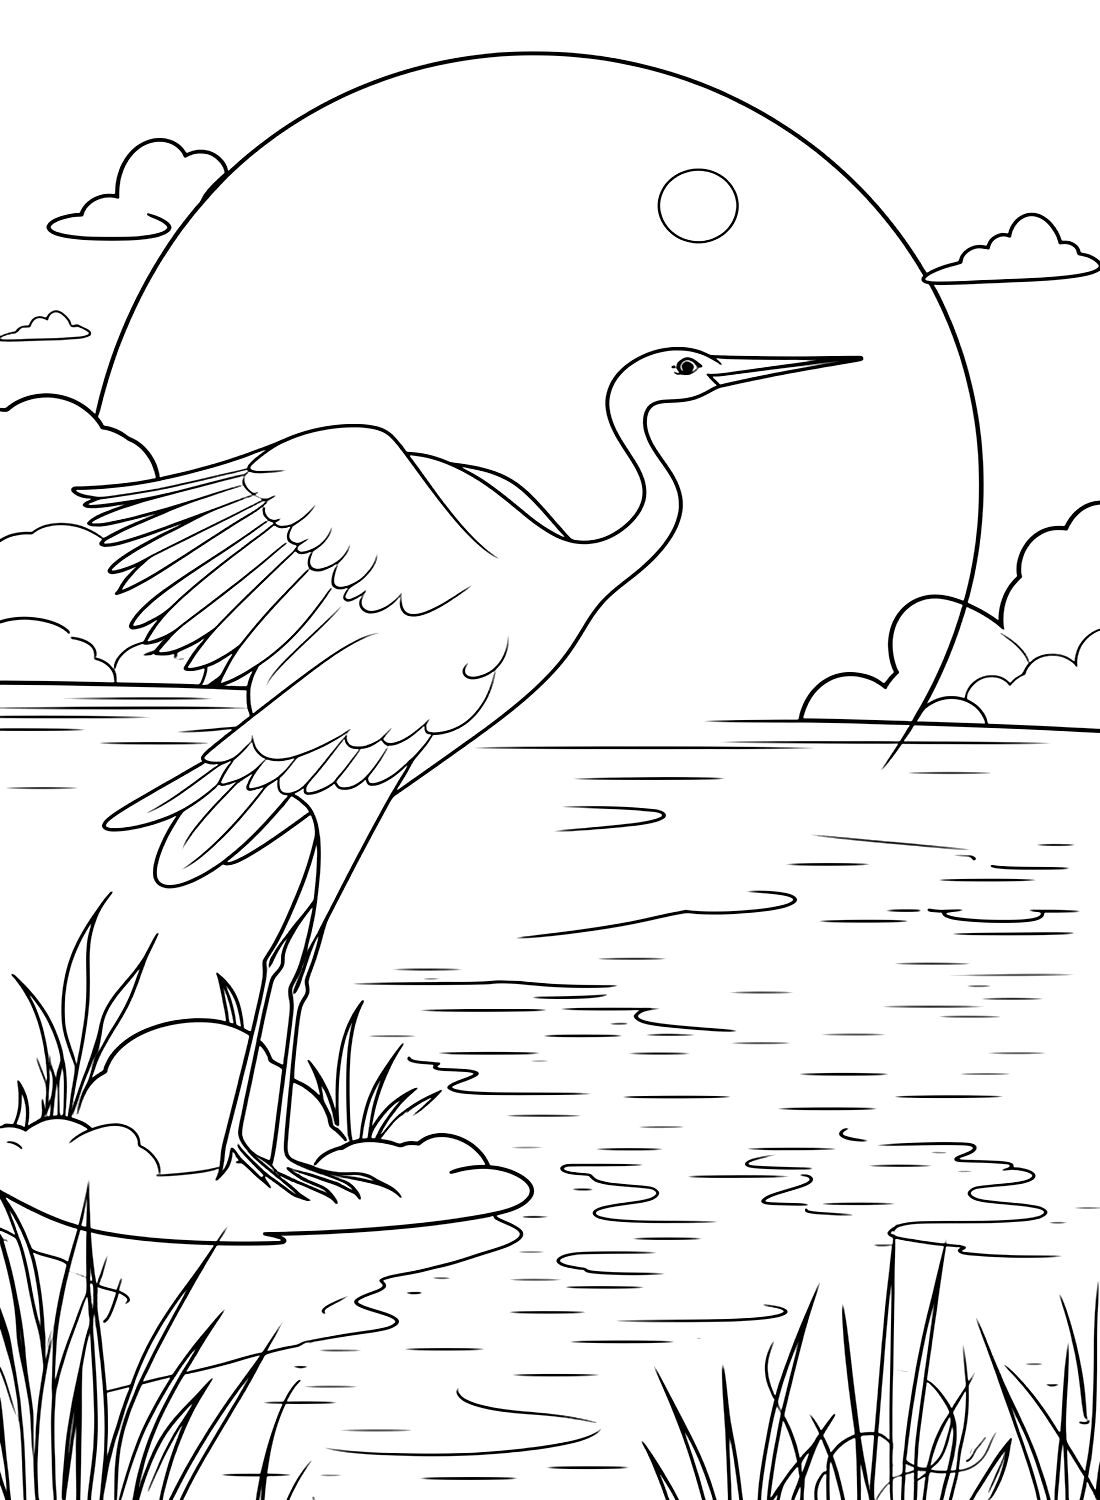 A Crane Bird under the Moon Coloring Page - Free Printable Coloring Pages